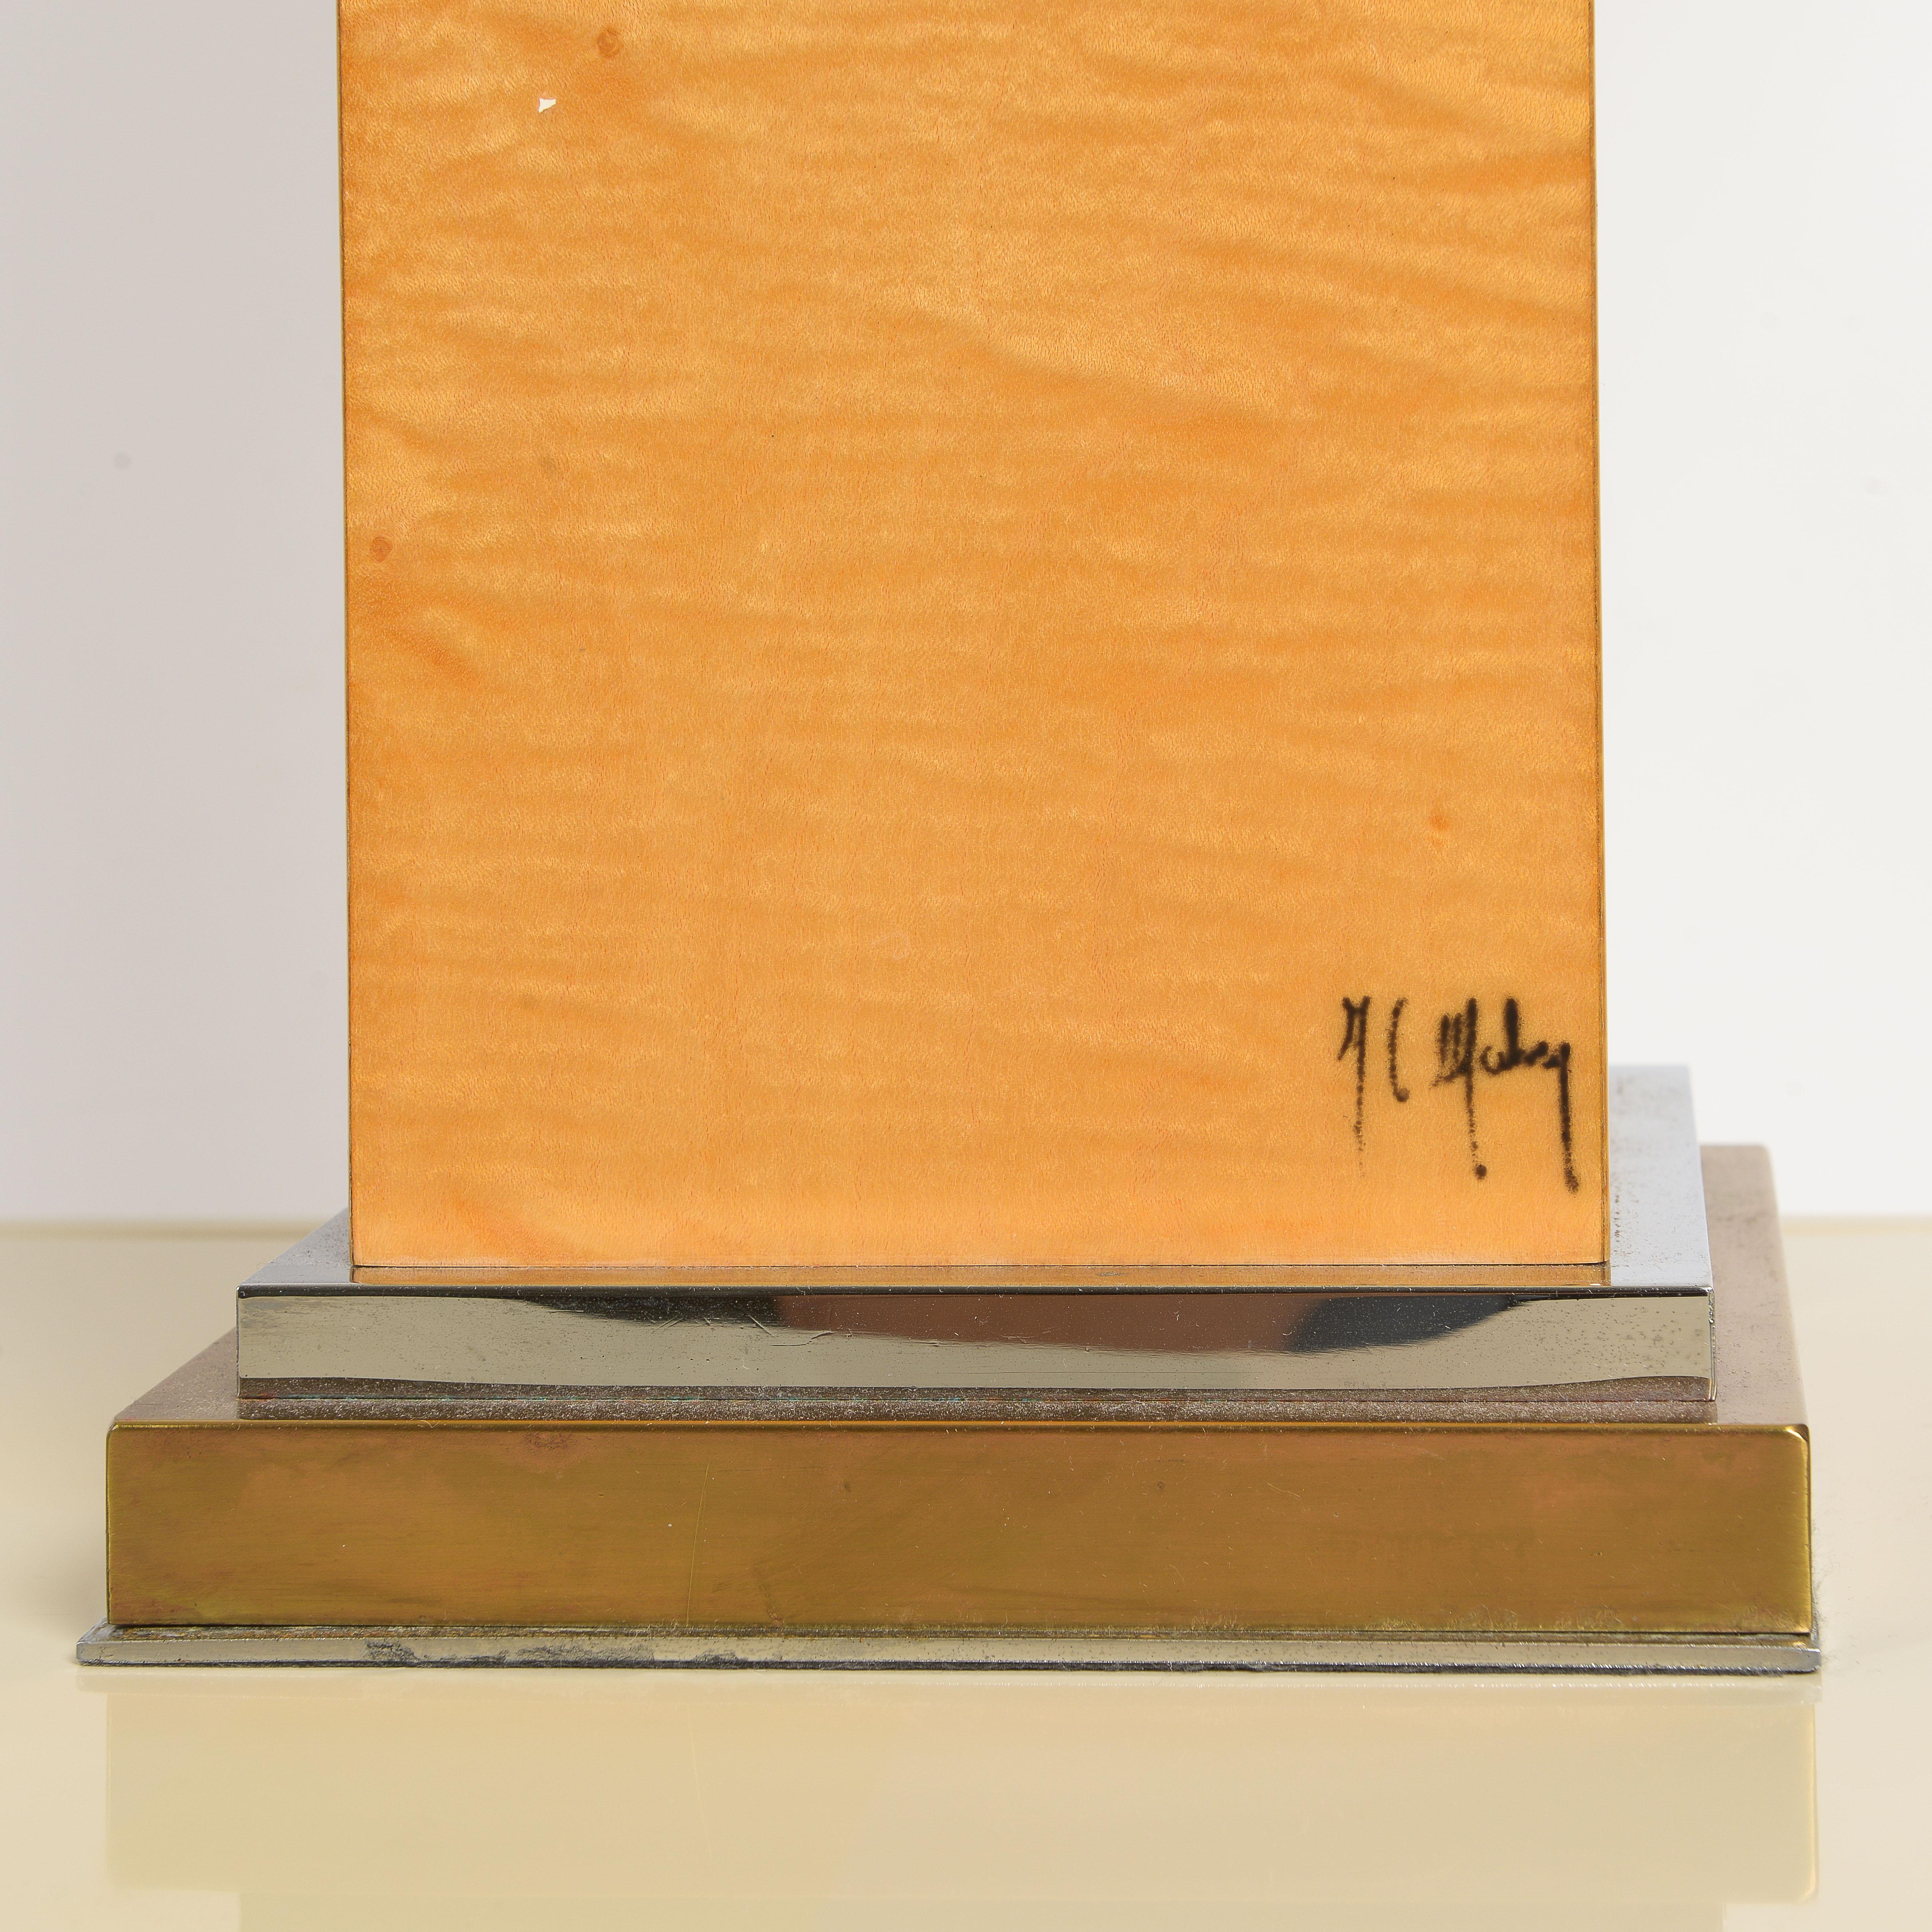 1970s Tall Rectangular sycamore base raised on a square brass base signed in lower right corner, France.
 L 20 ½  x H 34 ½  x W 20 ½  in 
Base: 8 x 8 in